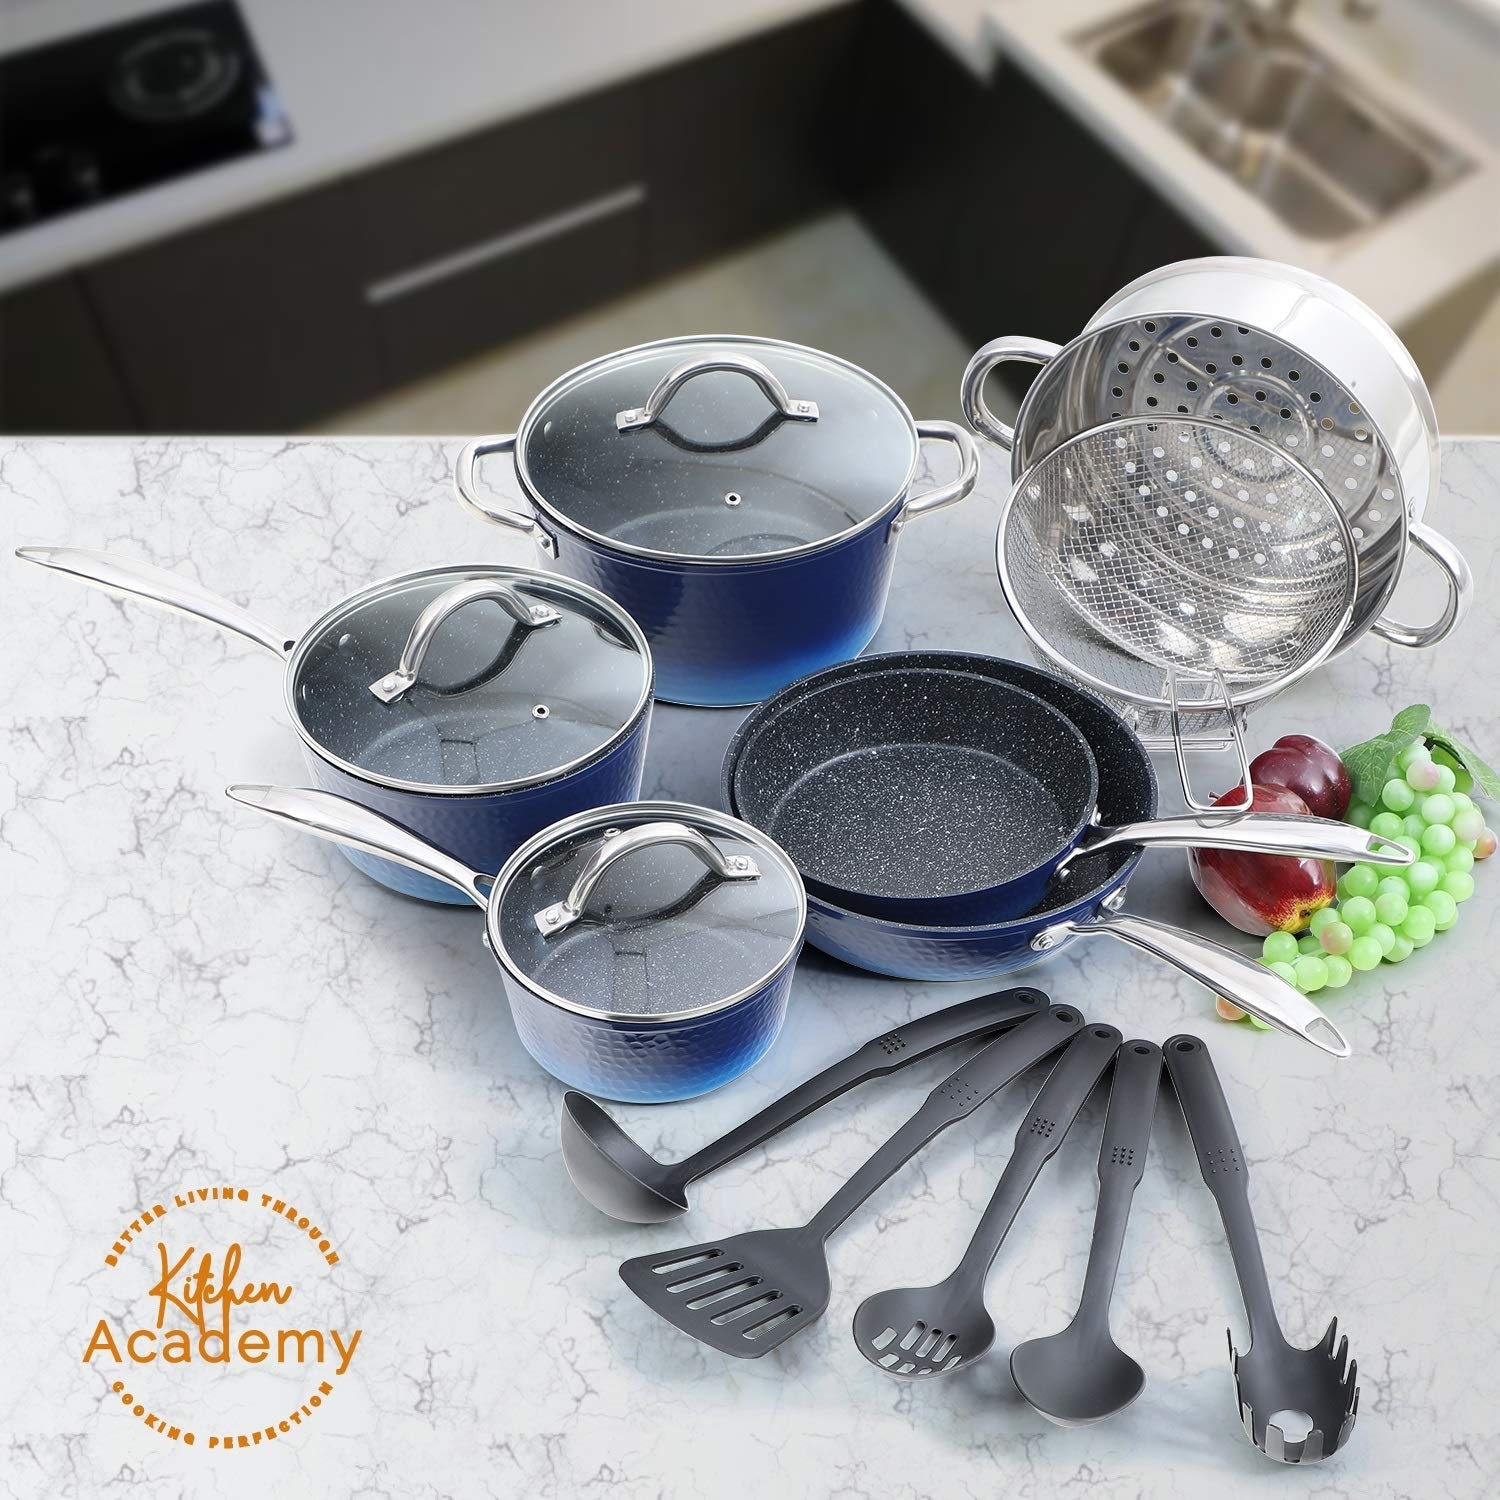 Kitchen Academy 12-Piece Nonstick Granite Stone Cookware Pots and Pans Set  with 4 PC Silicone Hot Handle Holder, Induction Set - On Sale - Bed Bath &  Beyond - 32400464